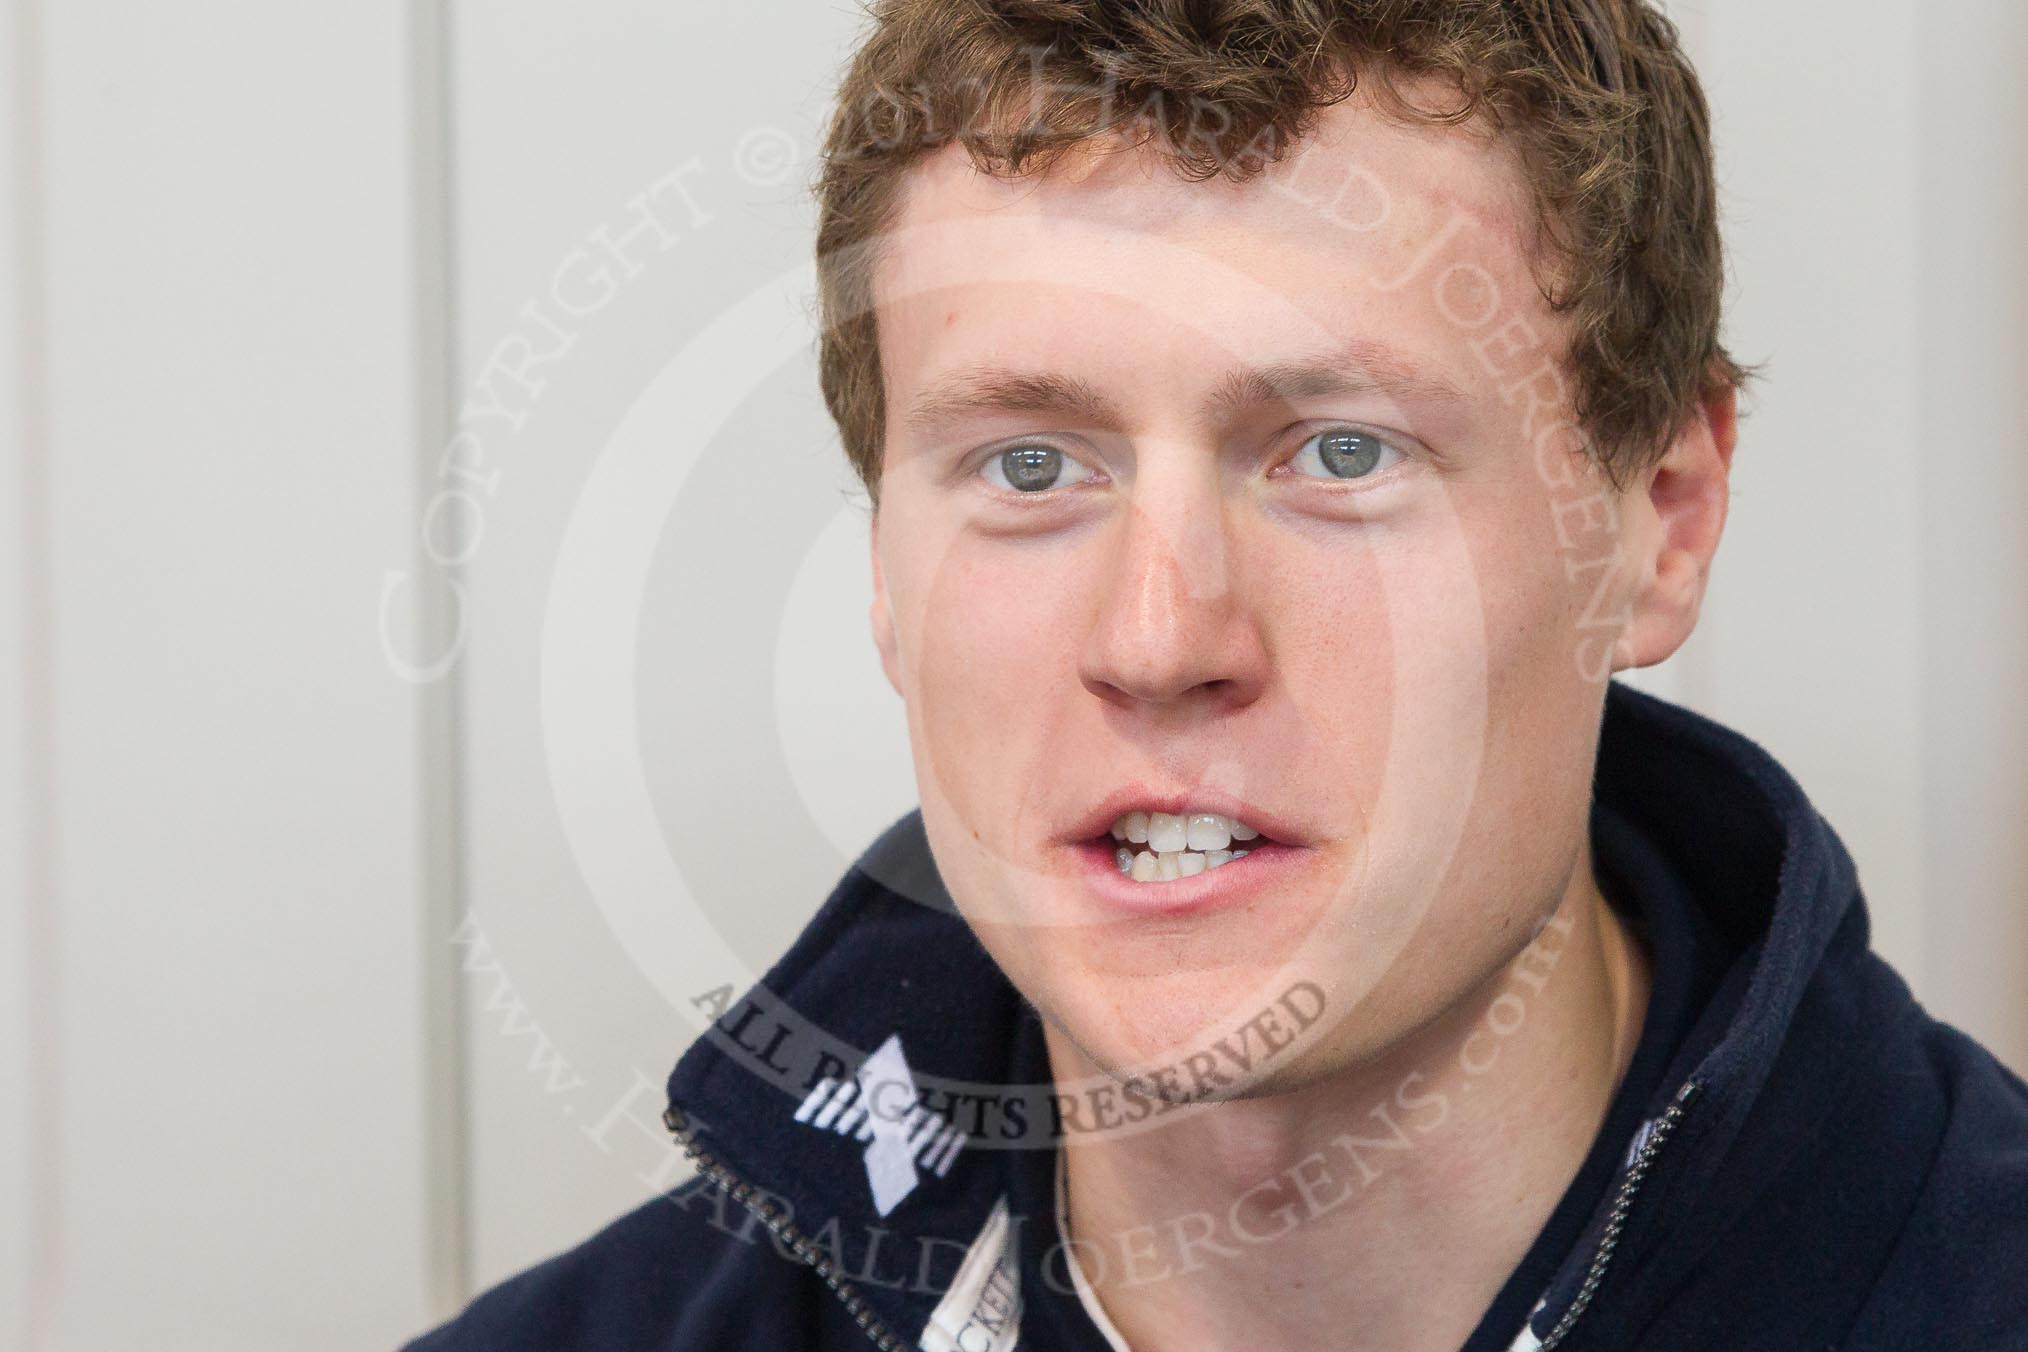 Oxford University Boat Club president Karl Hudspith during the press conference on April 5, 2012, at the BT Press Centre, two days before the 2012 Boat Race.